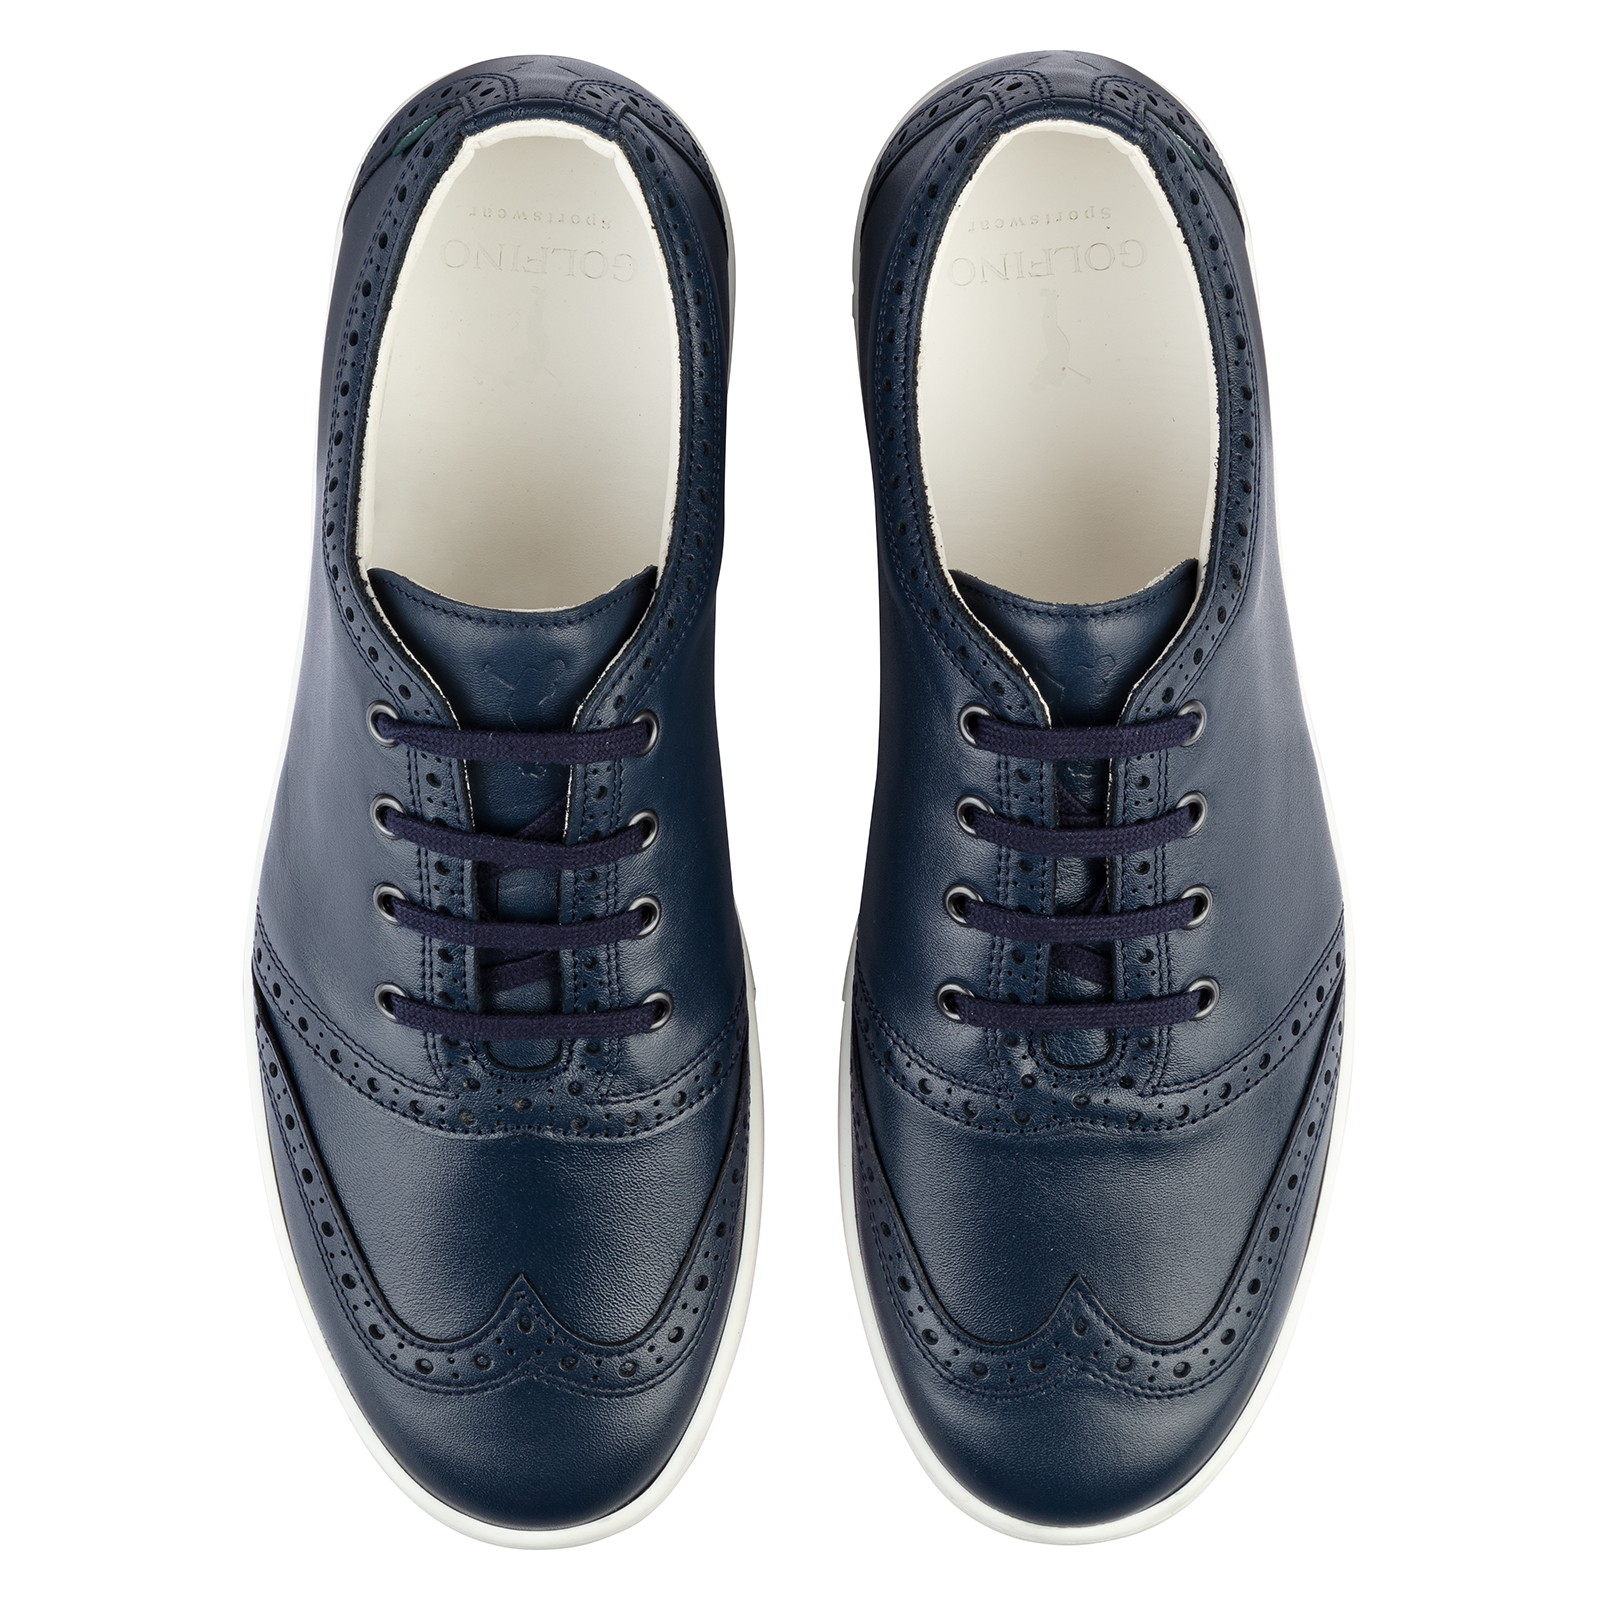 Men's brogue-style golf shoes in genuine leather